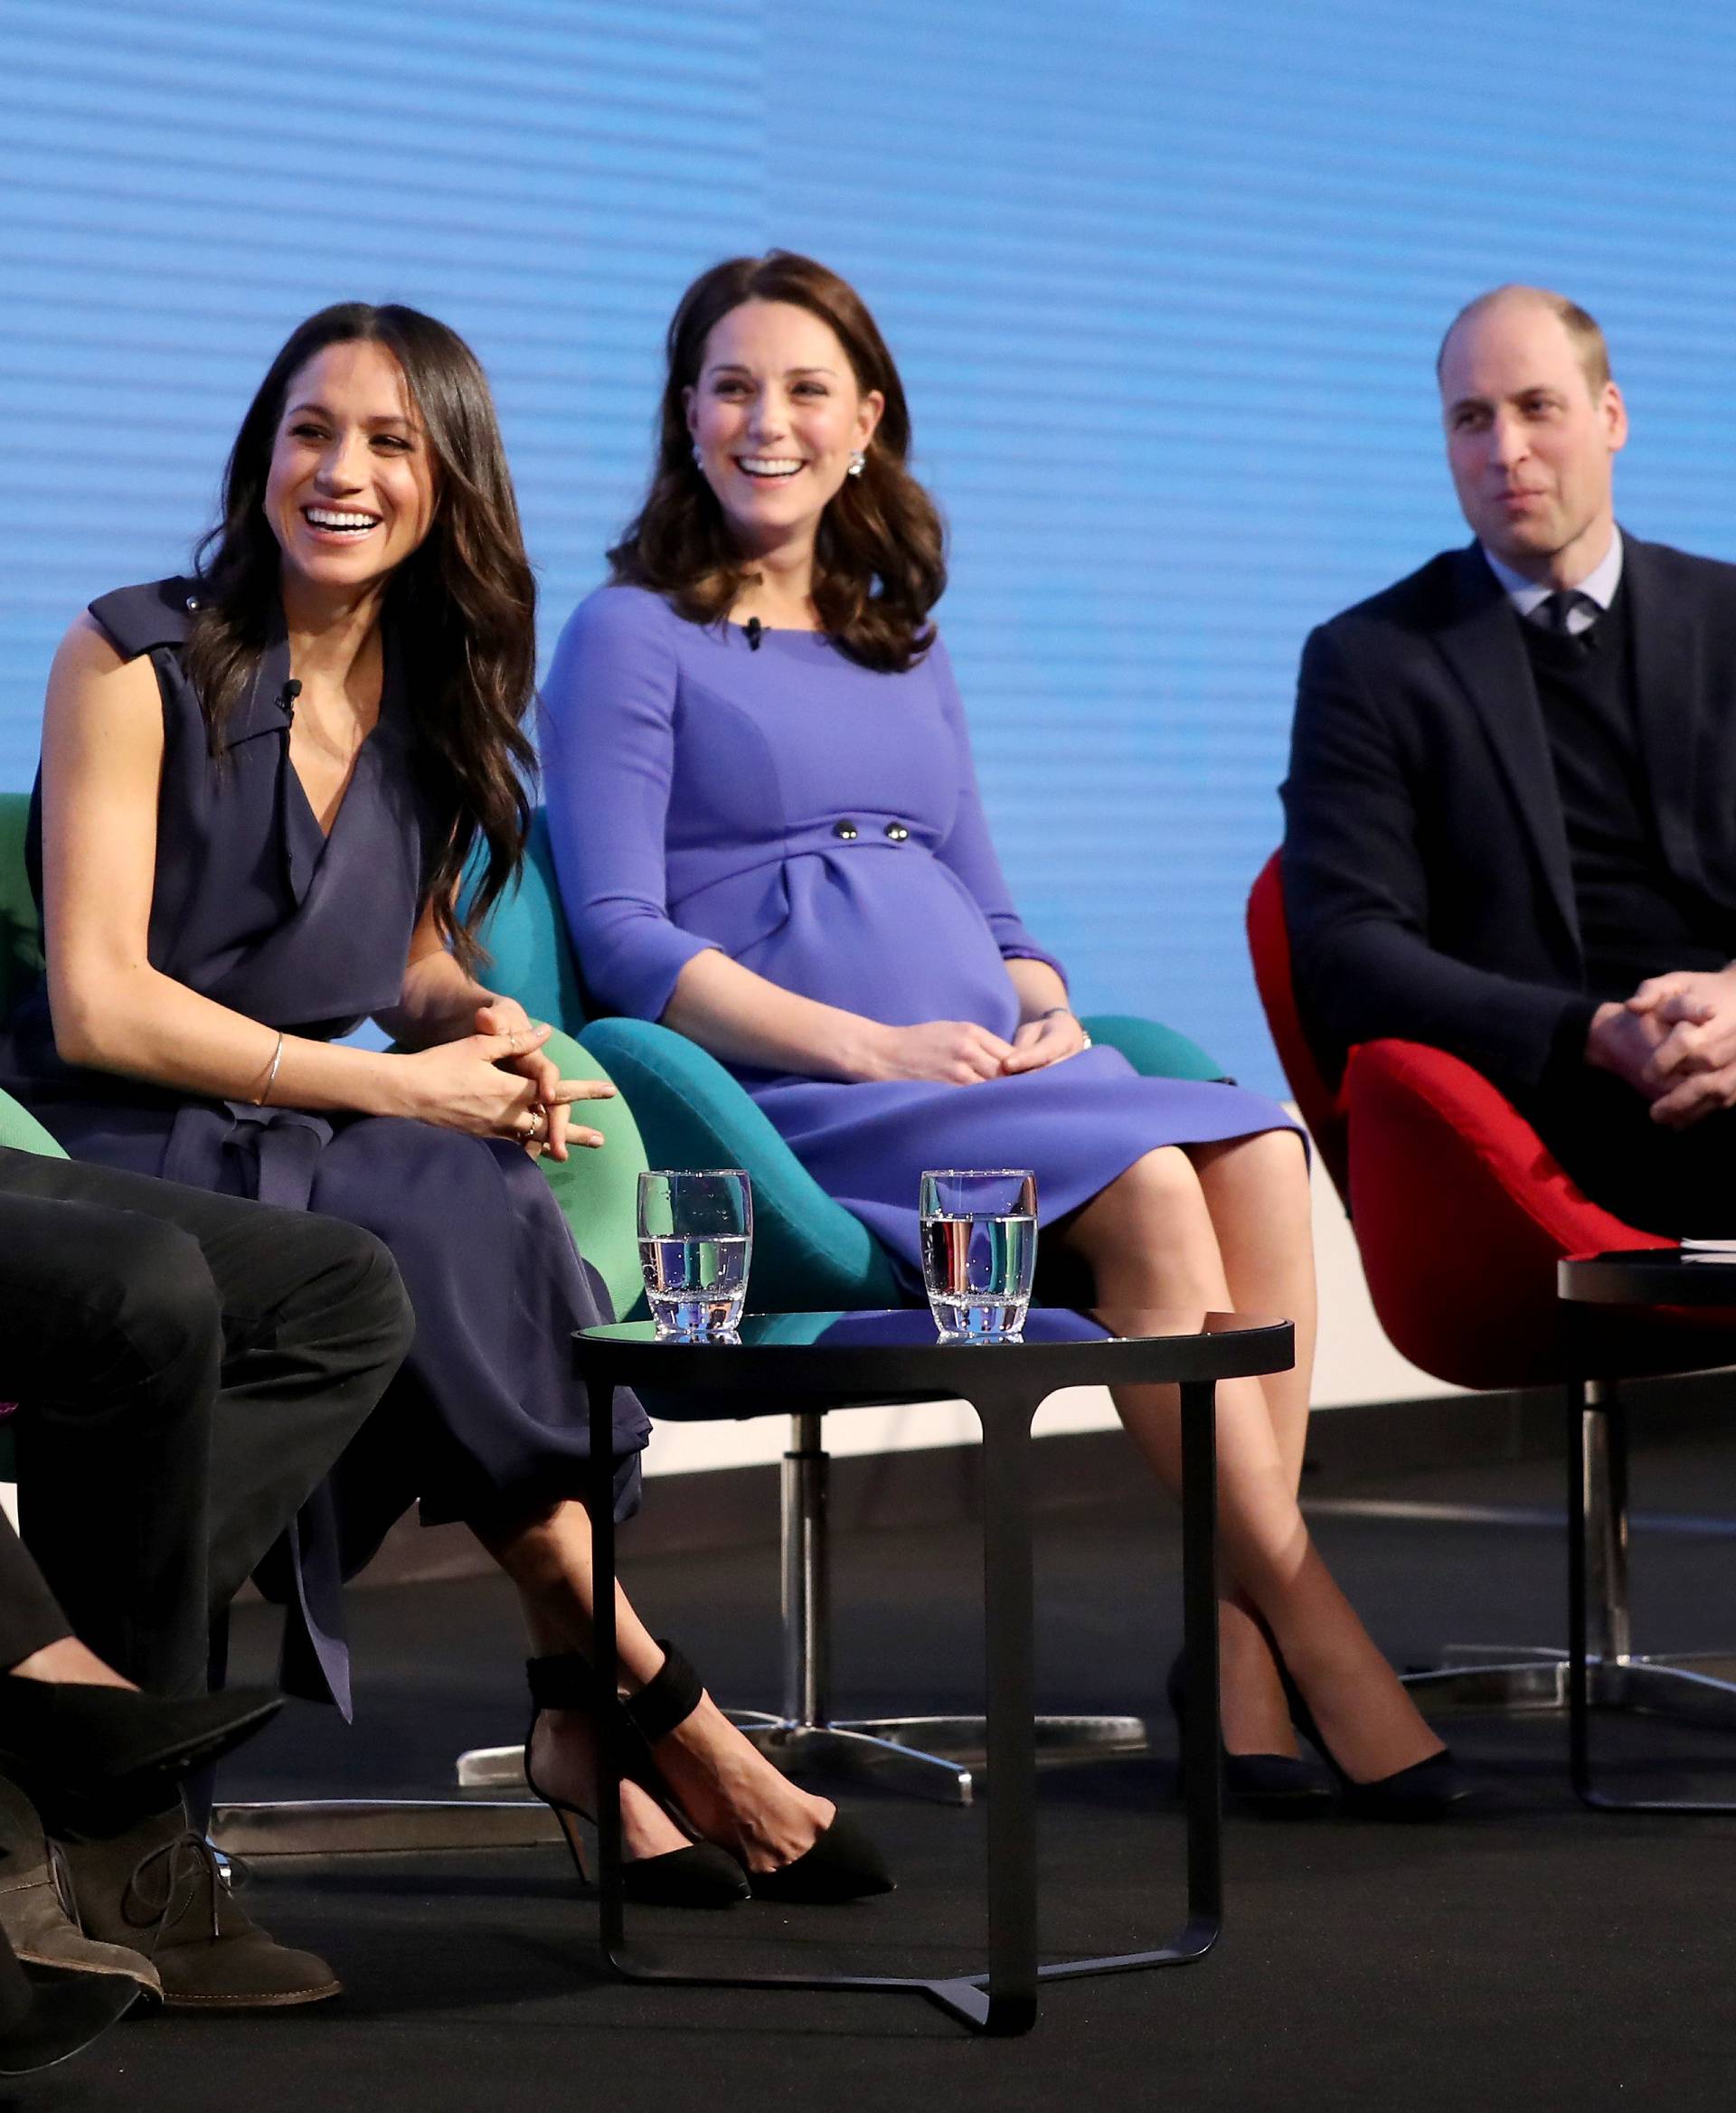 Britain's Prince Harry, his fiancee Meghan Markle, Prince William and Catherine, Duchess of Cambridge attend the first annual Royal Foundation Forum held at Aviva in London